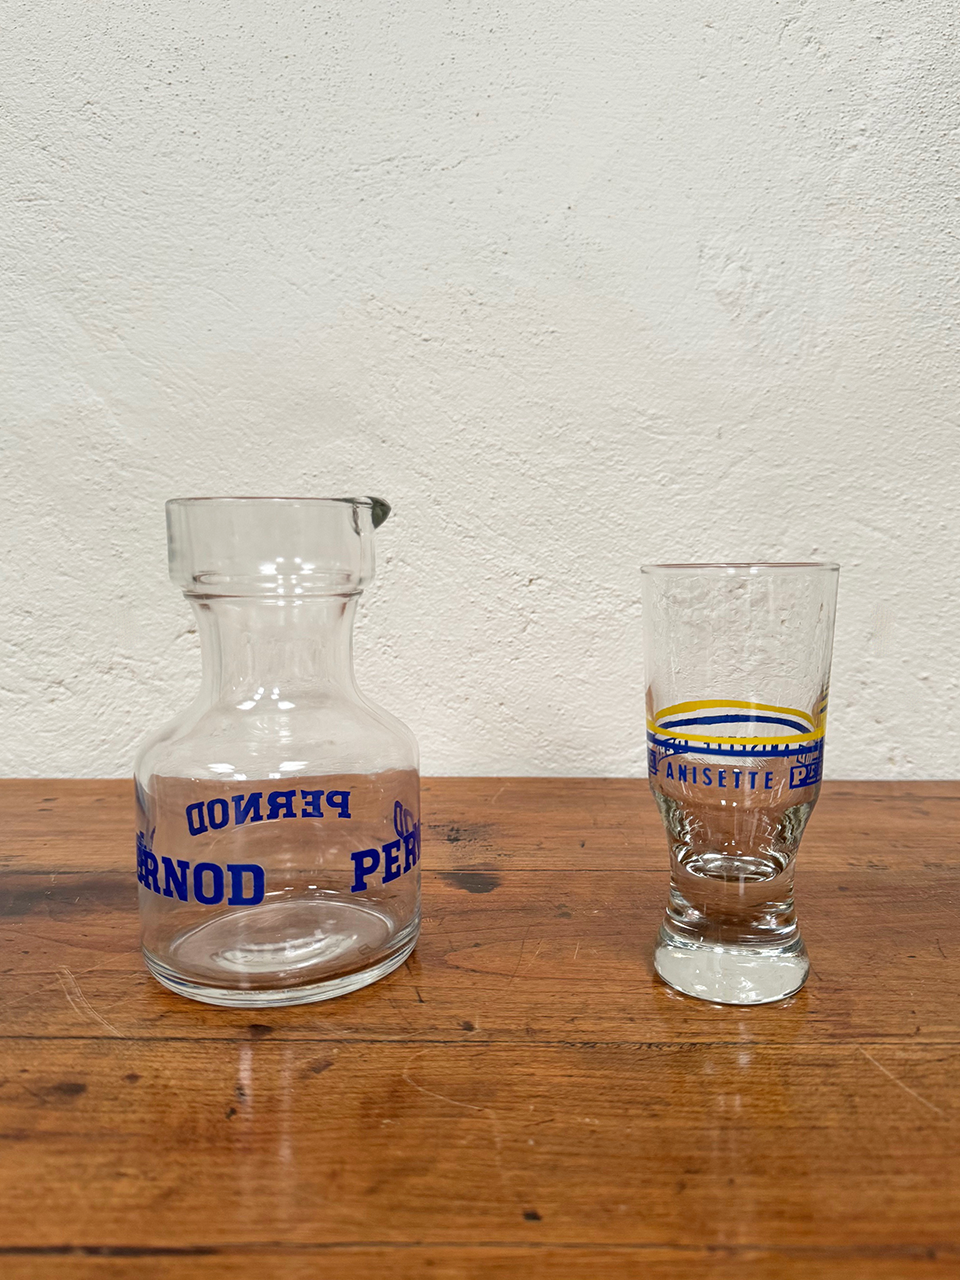 Pernod pitcher and glasses